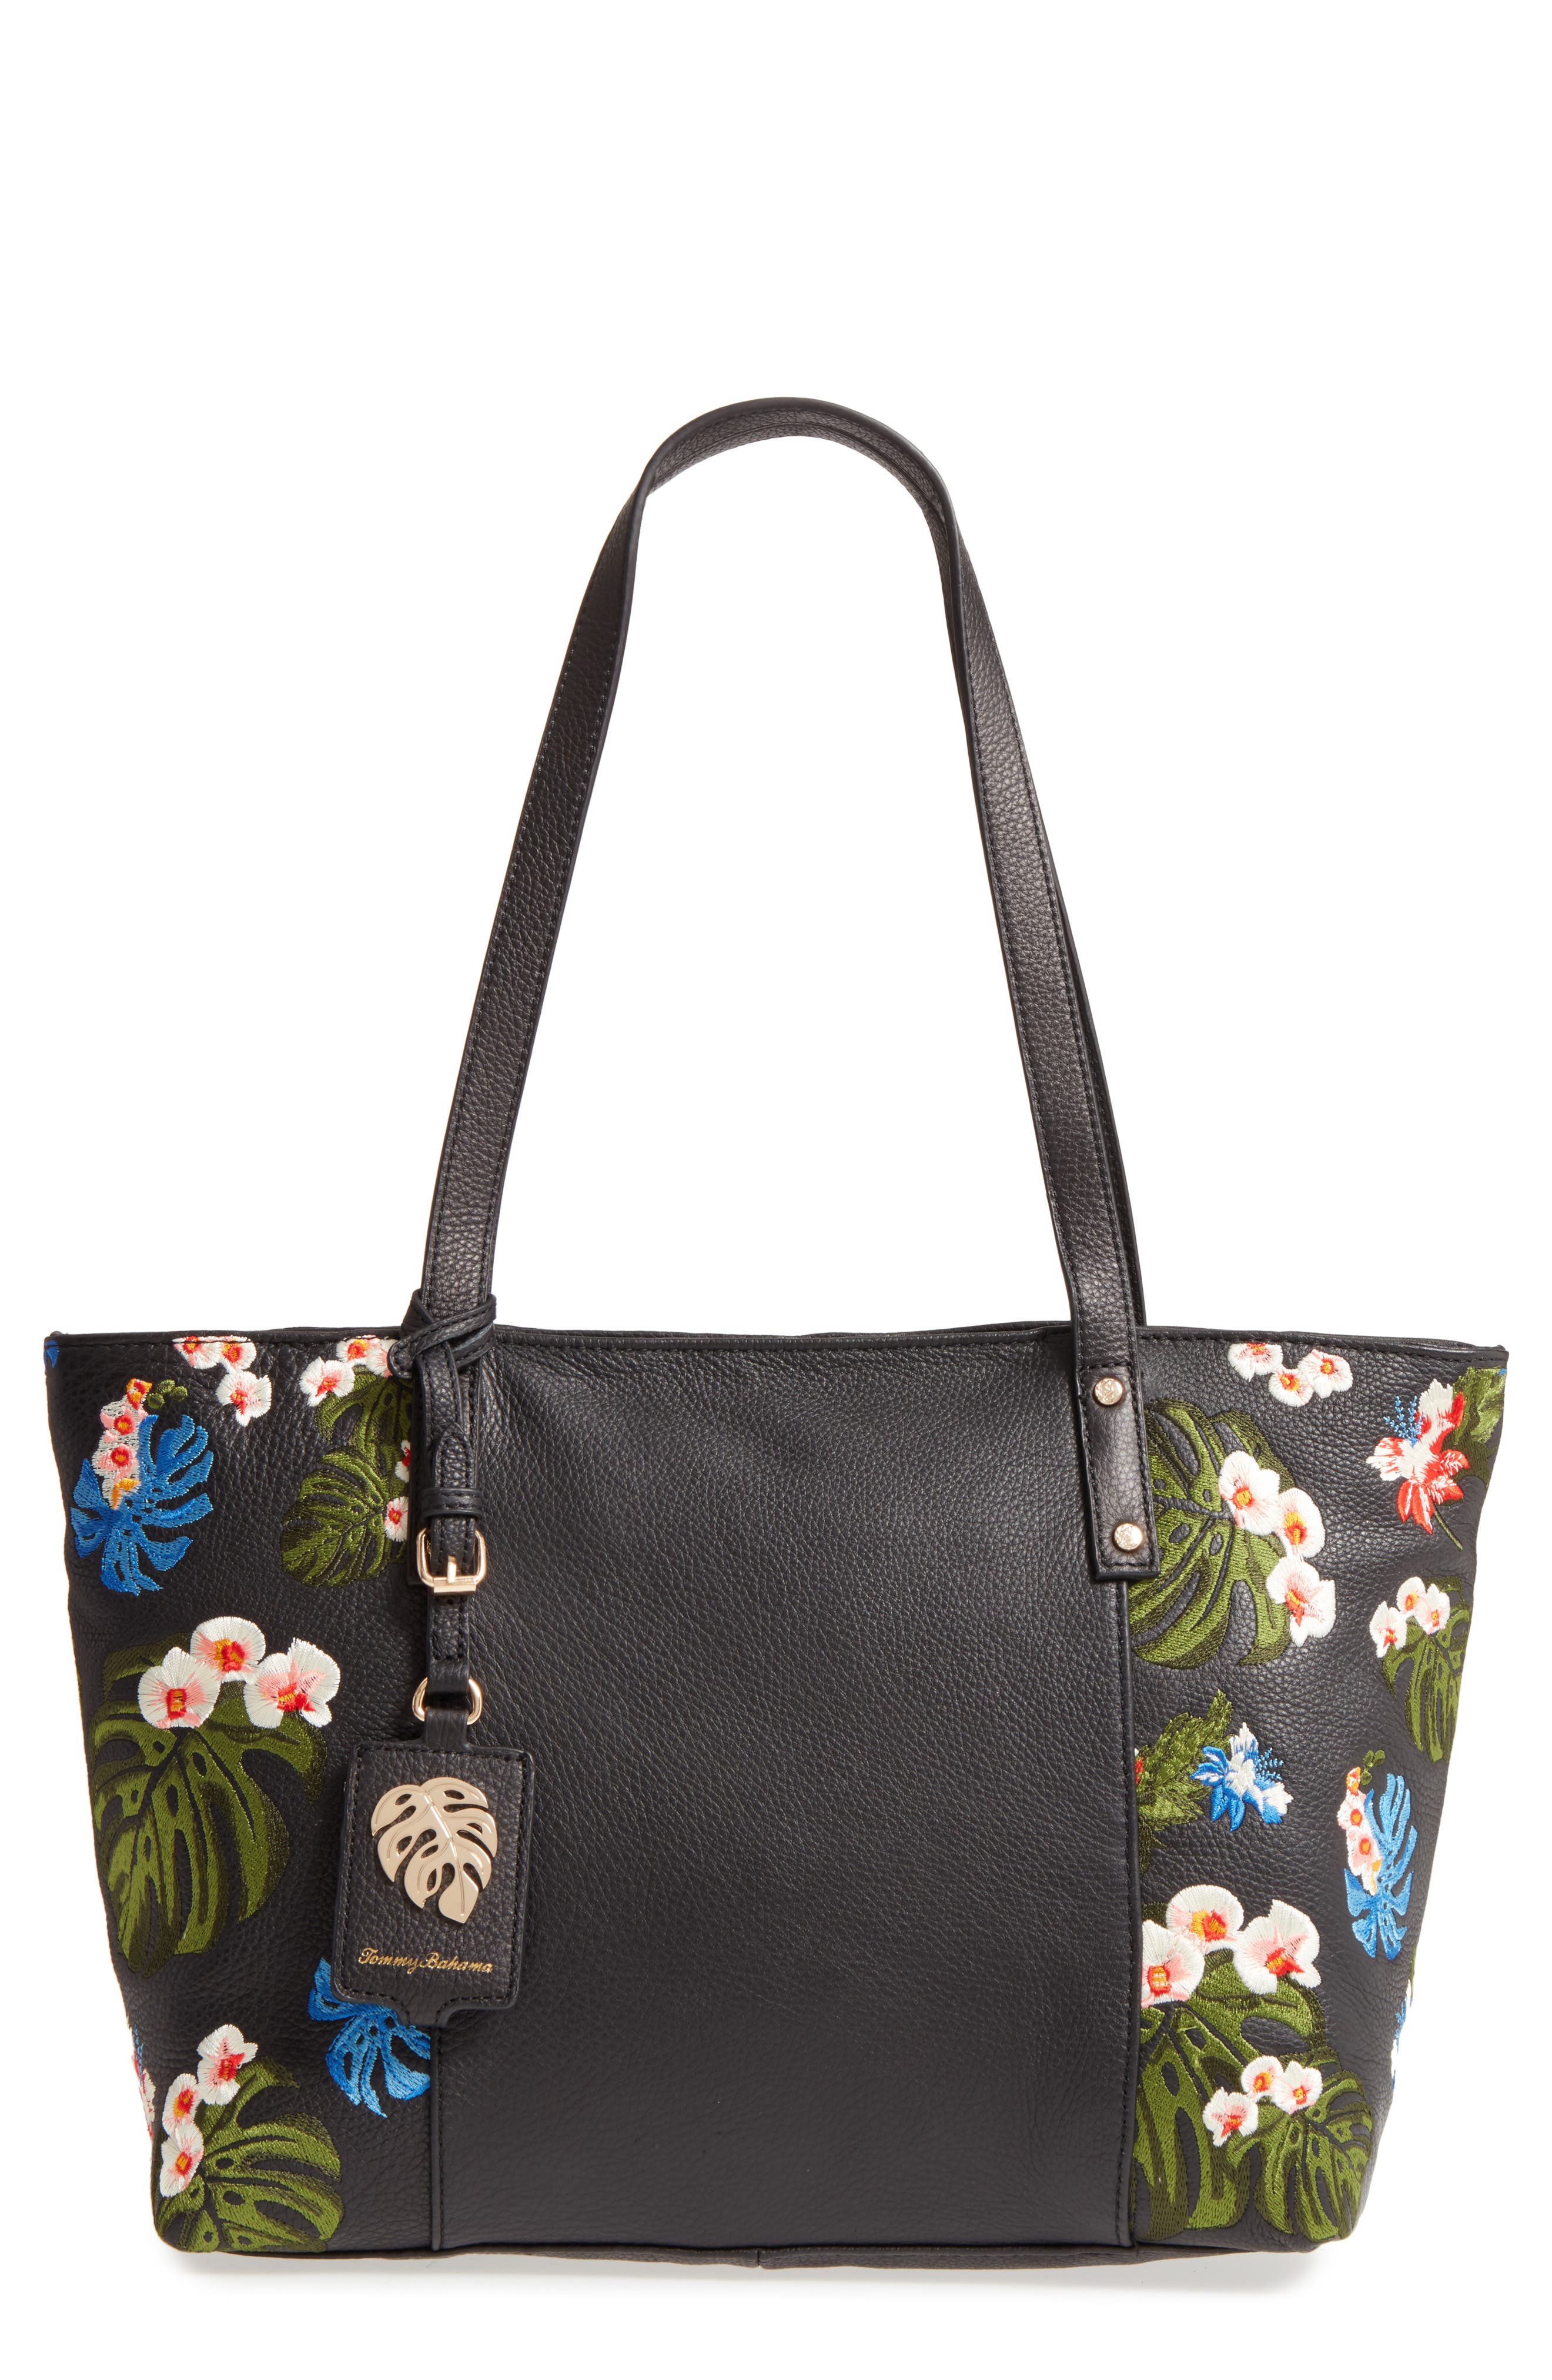 tommy bahama floral tote